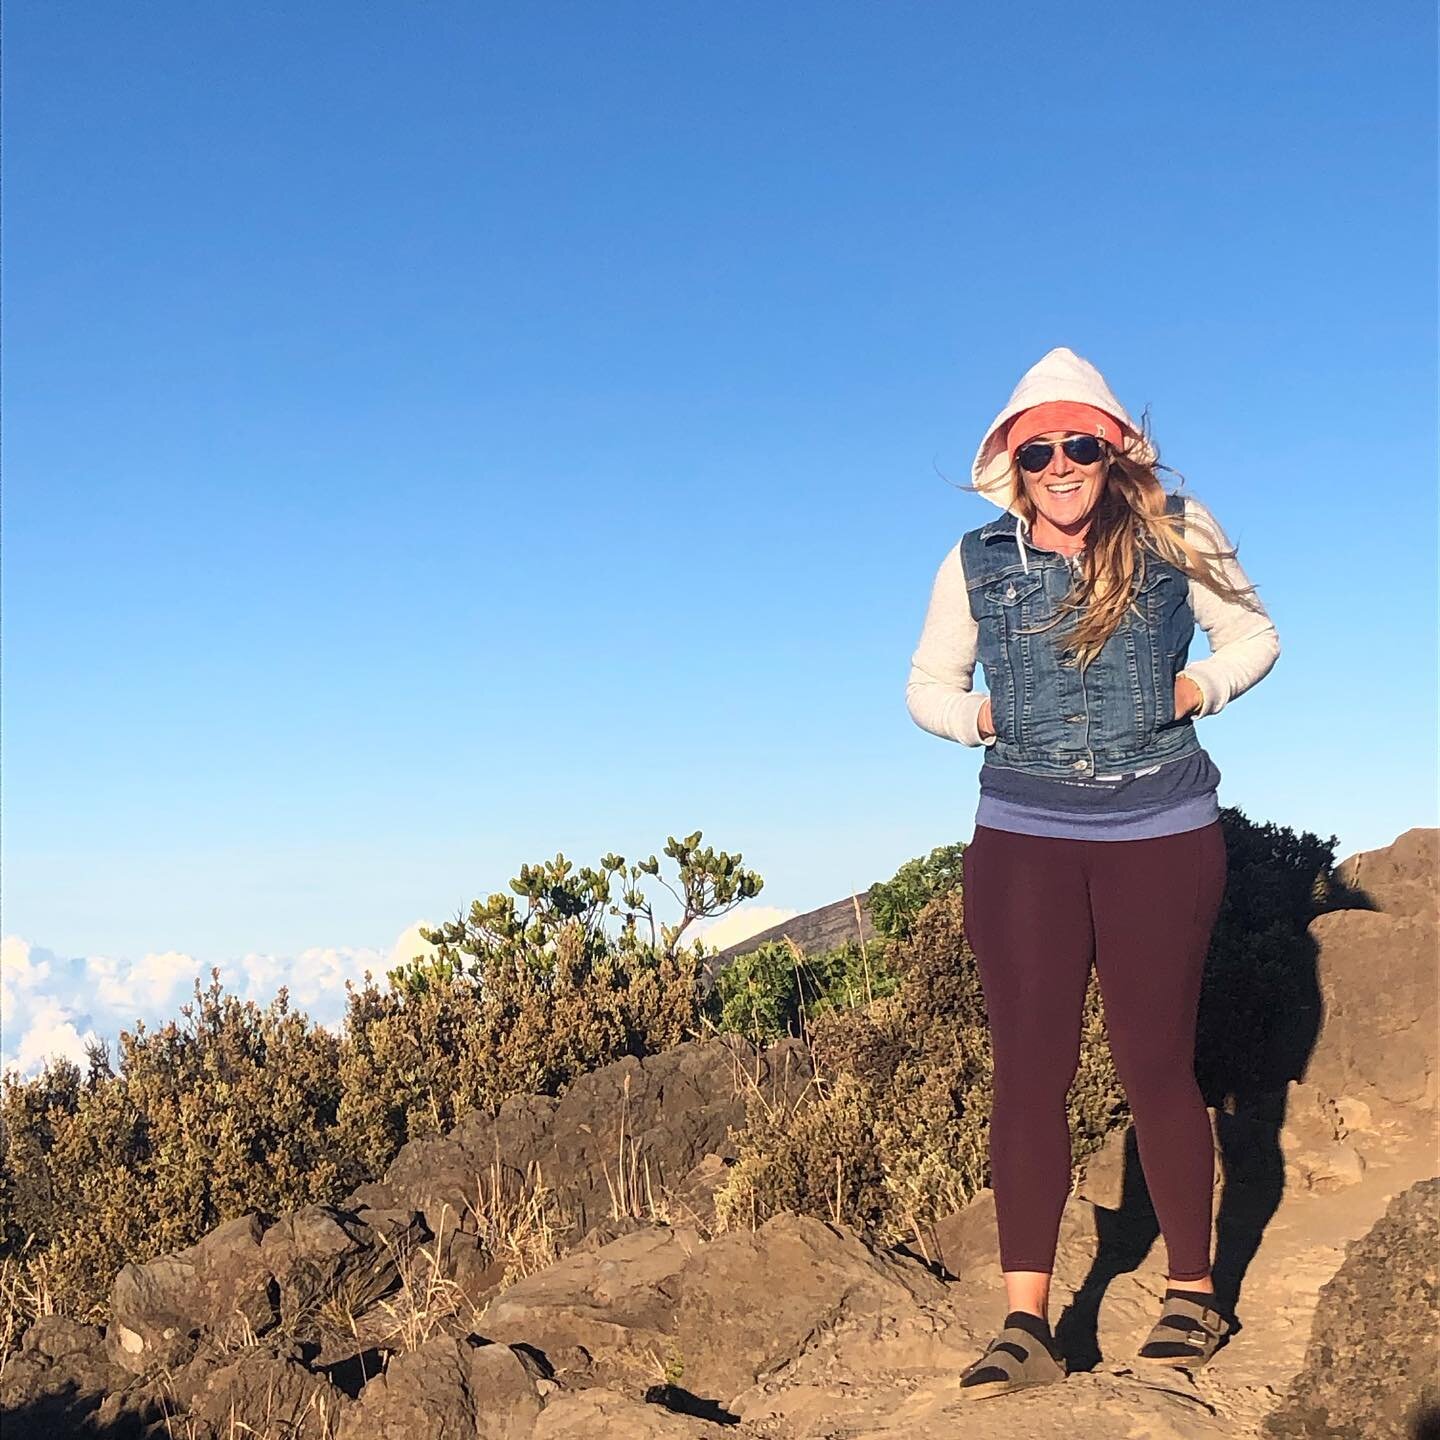 Yep, still in HI, who would have thought I&rsquo;d need so many layers!!! Honestly I could have done with a few more!
✨
Went up and to Haleakala for the sunset then stayed for a car dinner of beers and poke while waiting for the stars to all pop out!